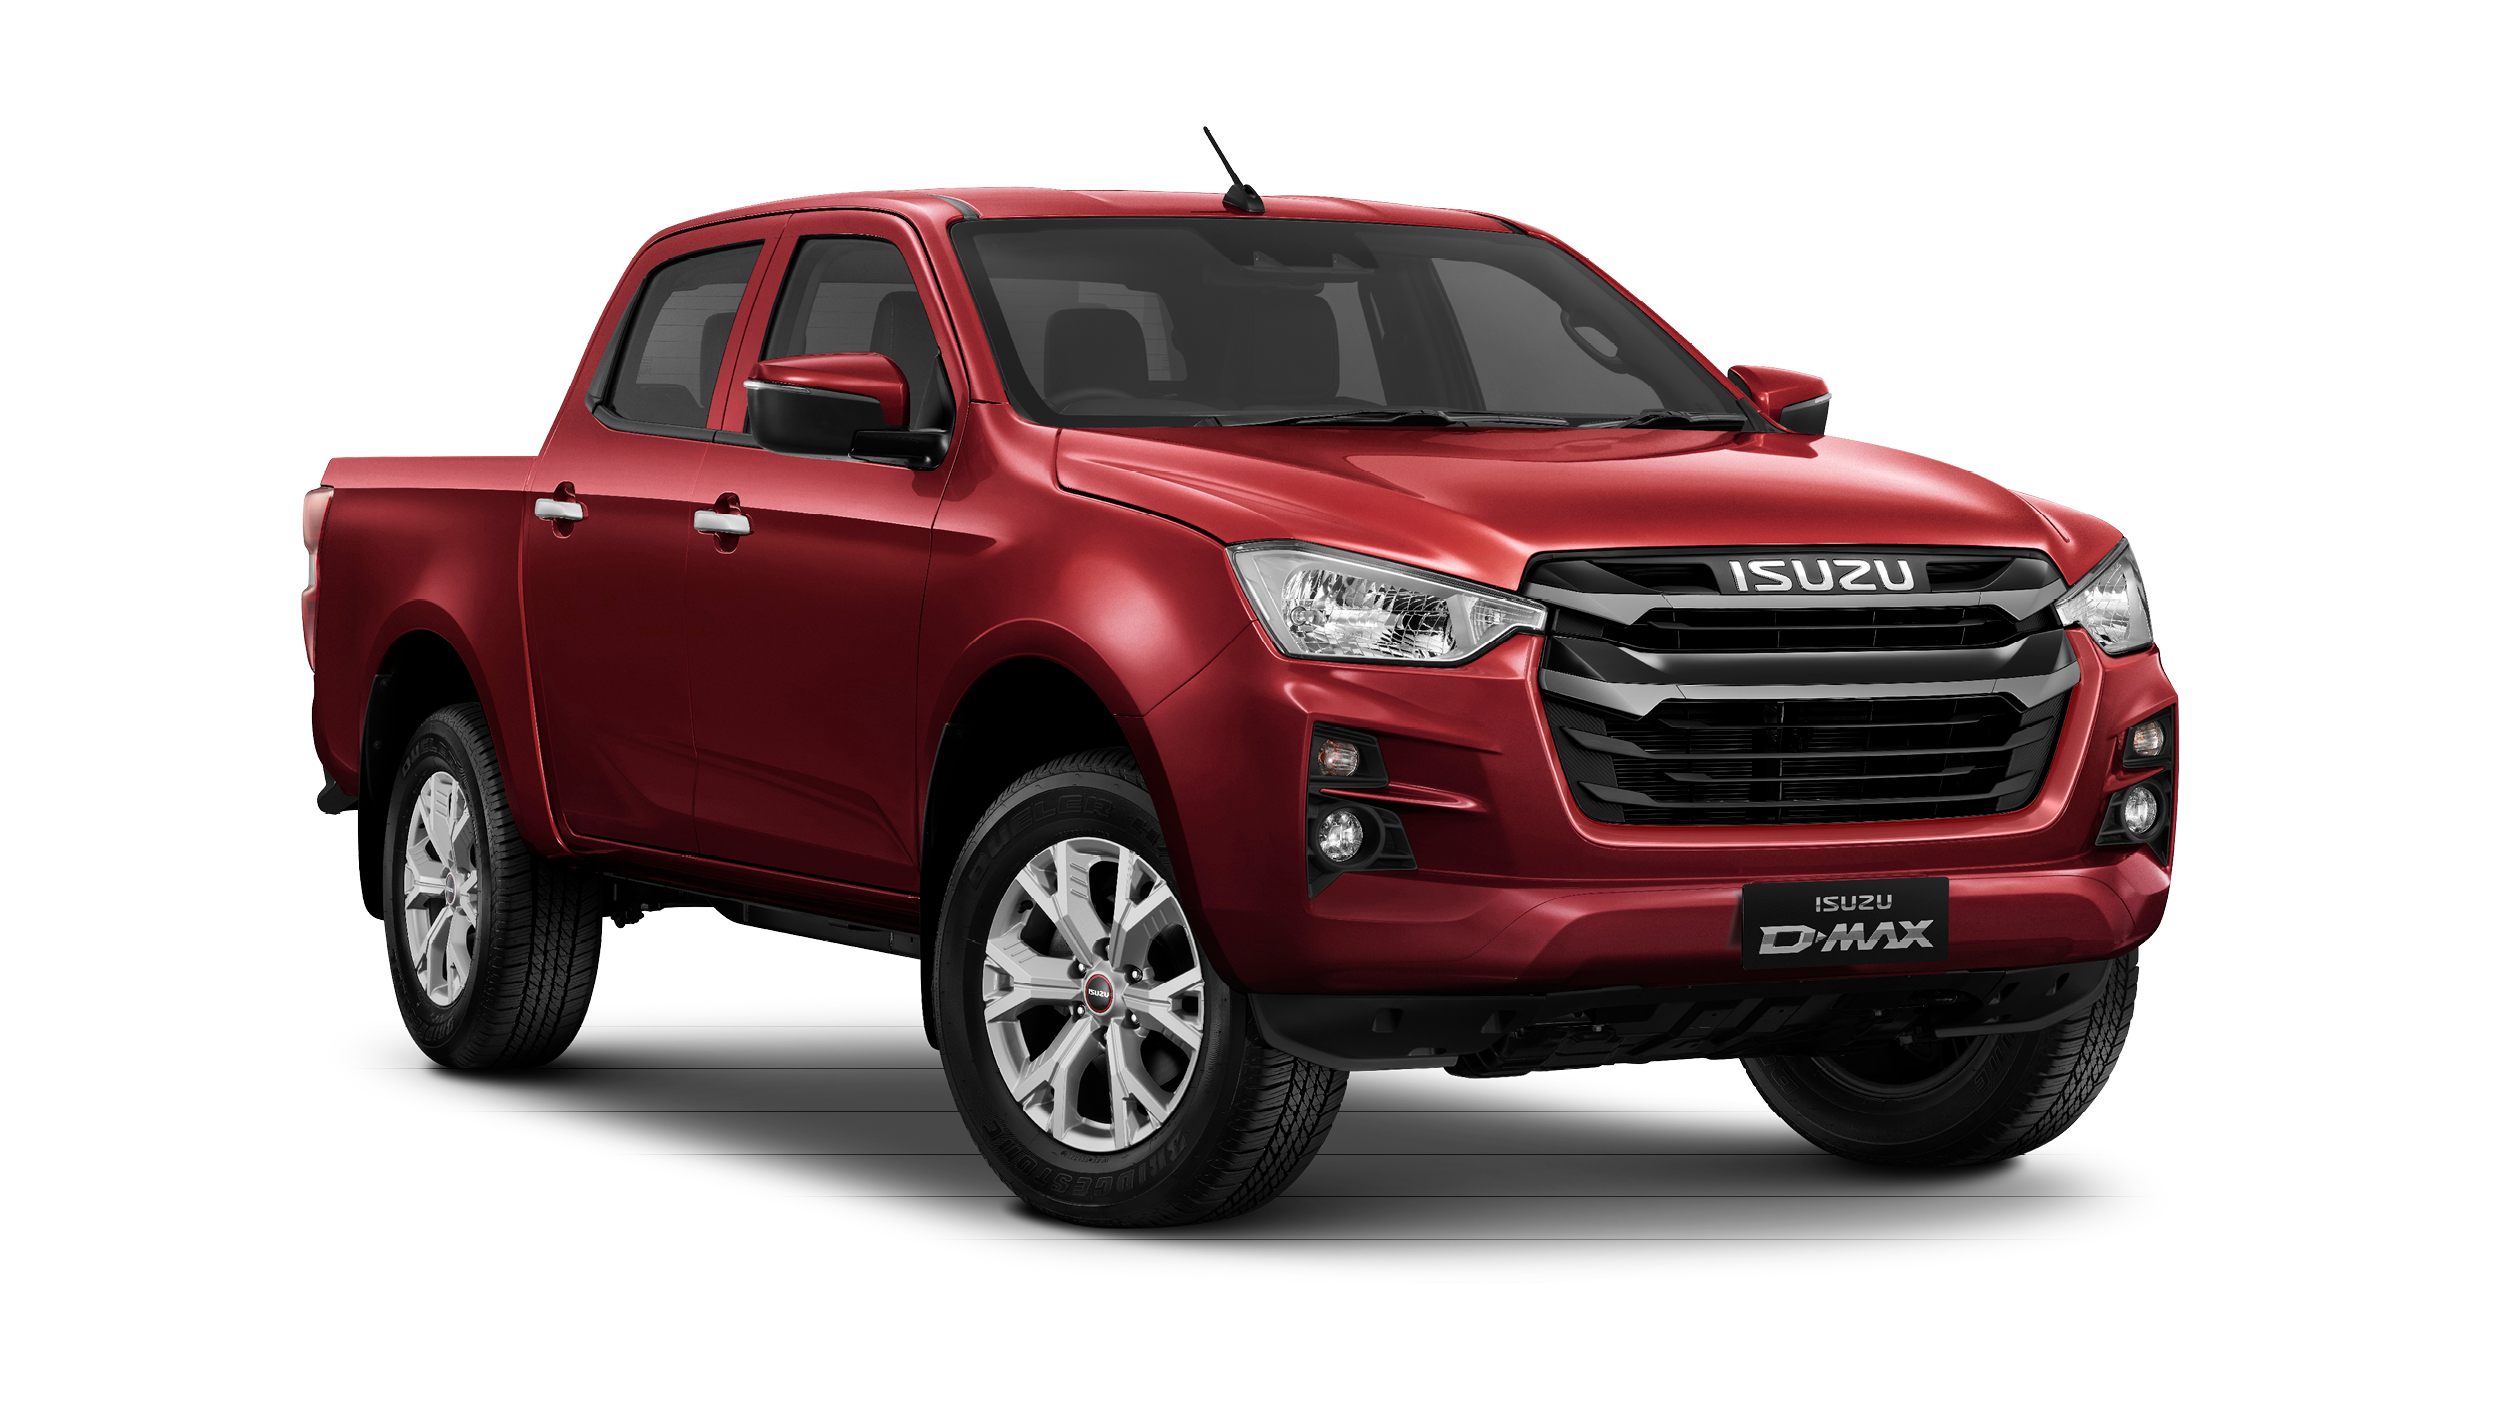 Isuzu D-Max DL20 Extended Cab Spinel Red